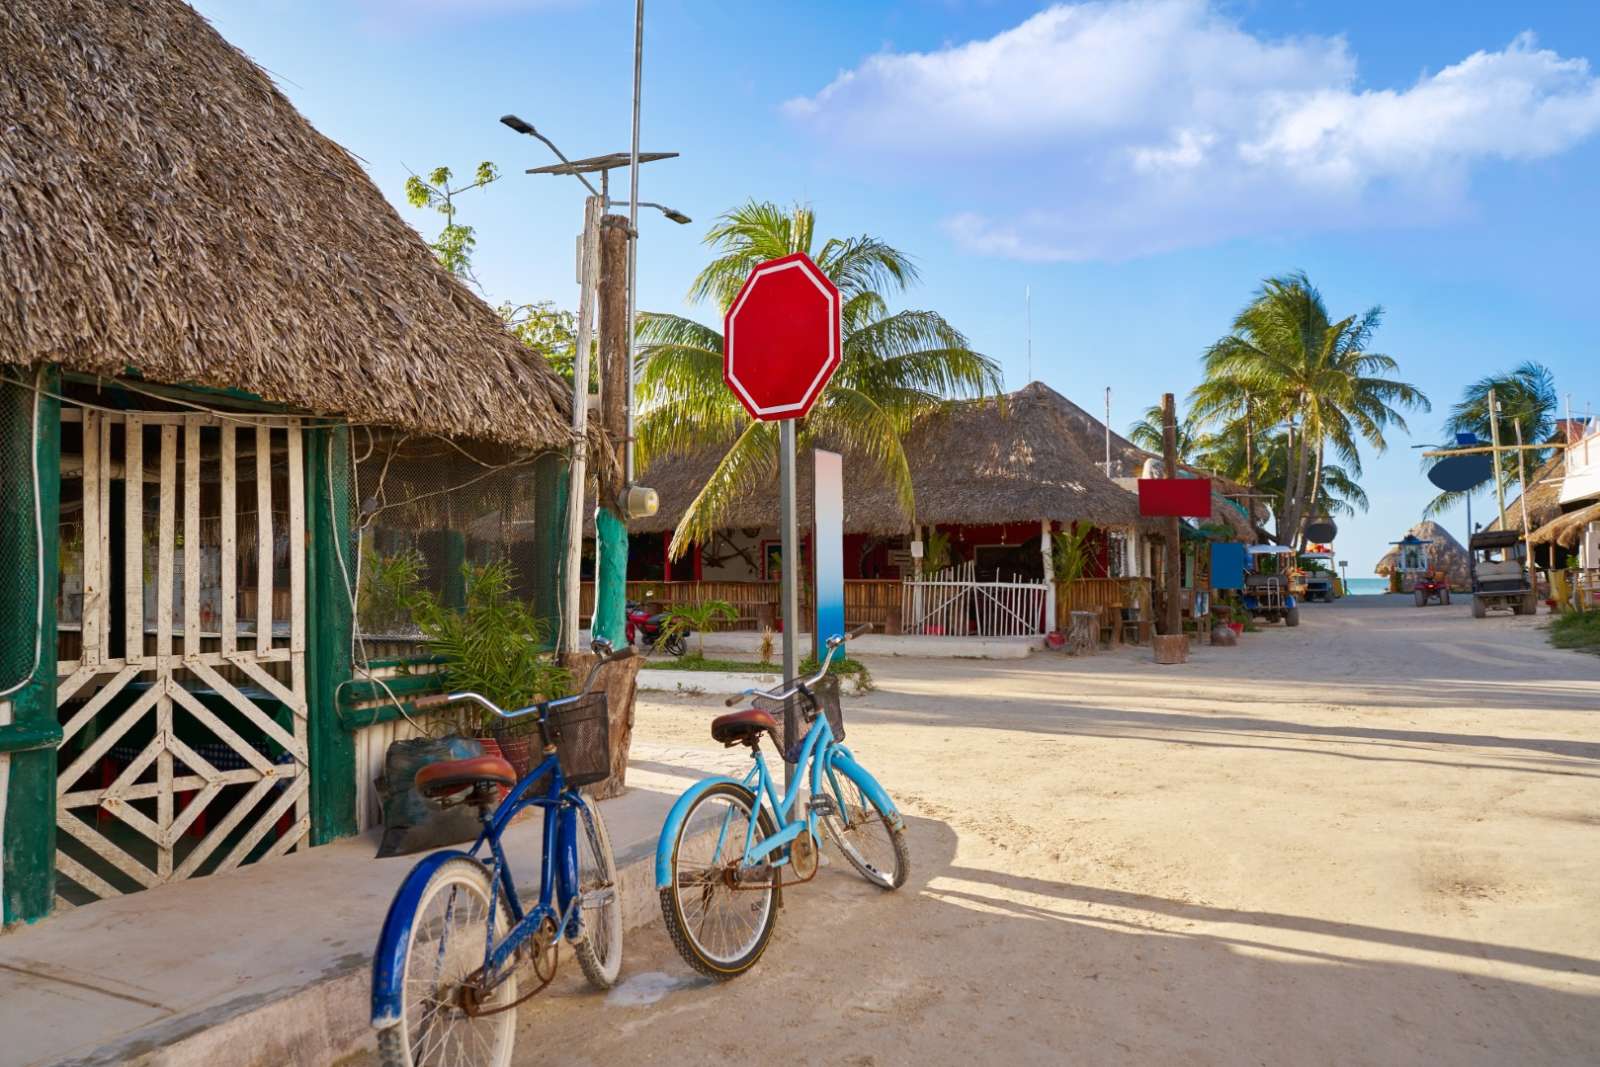 Bikes in town Holbox, Mexico